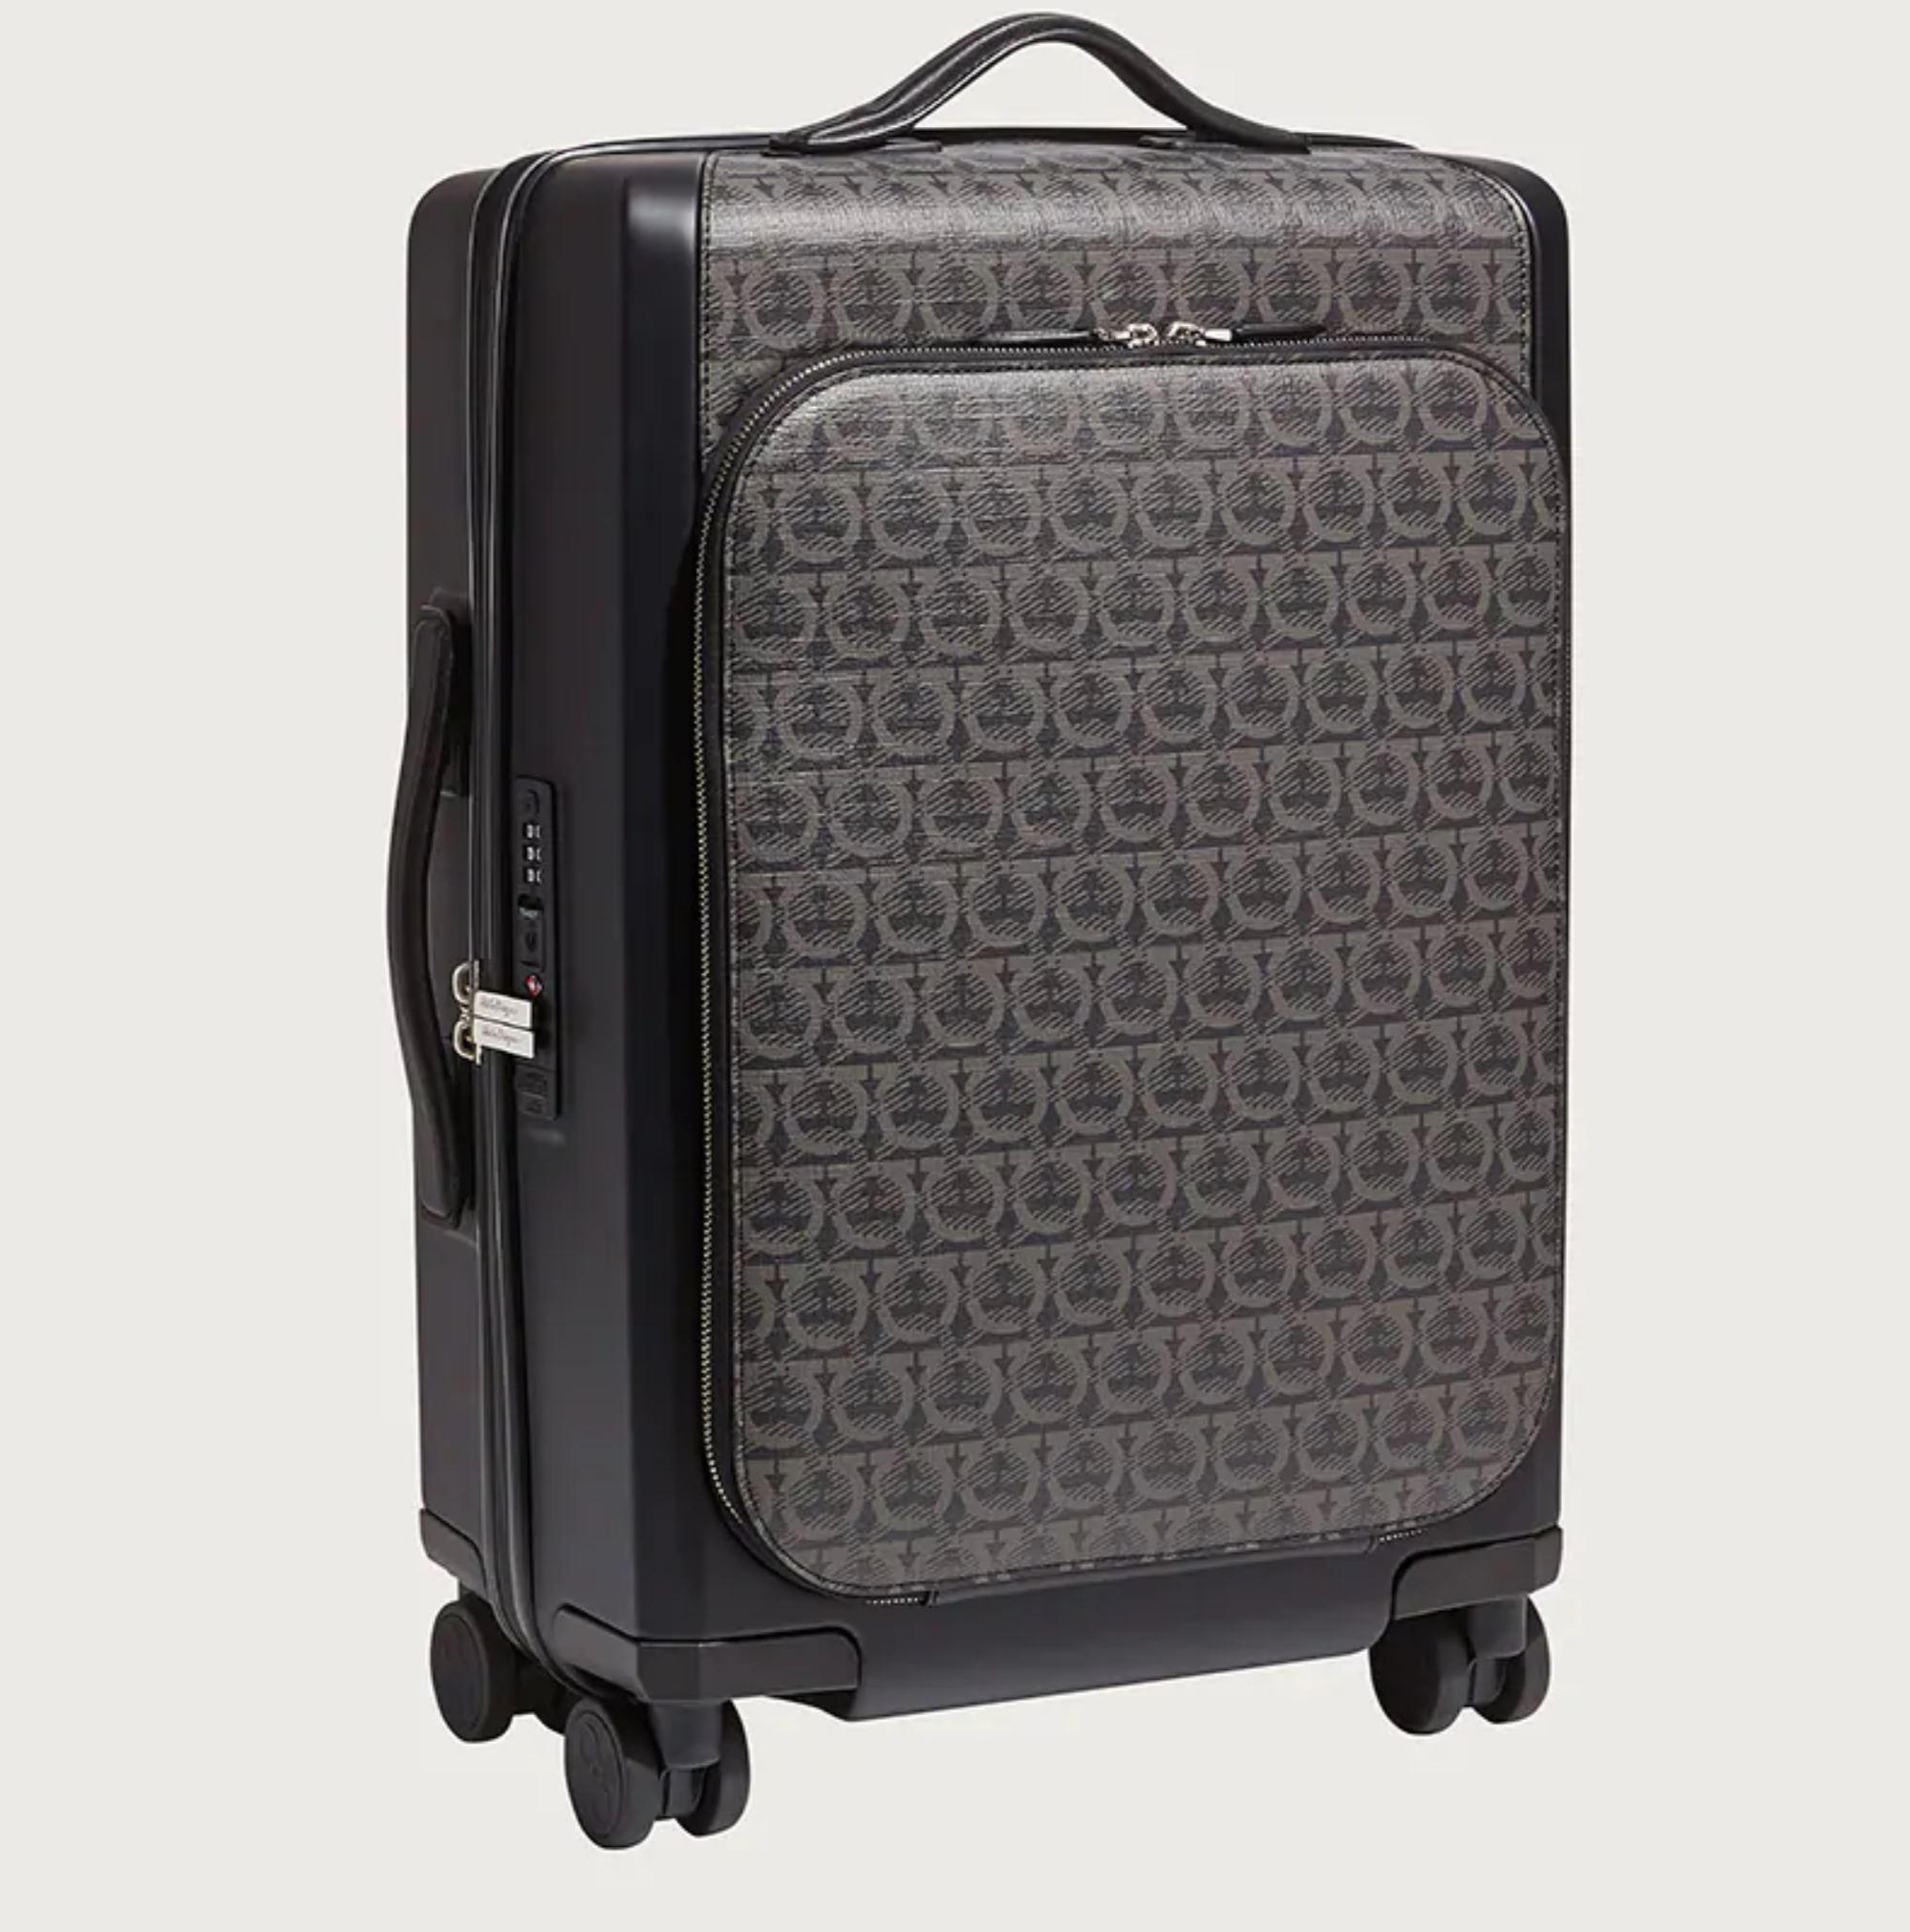 Salvatore Ferragamo
Brand New With Tags
$1990
Charcoal and black leather and acetate Salvatore Ferragamo small Gancini trolley with silver-tone hardware
Zip pocket at front
Flat handles
Retractable handle drop
Four wheels at base
Black canvas